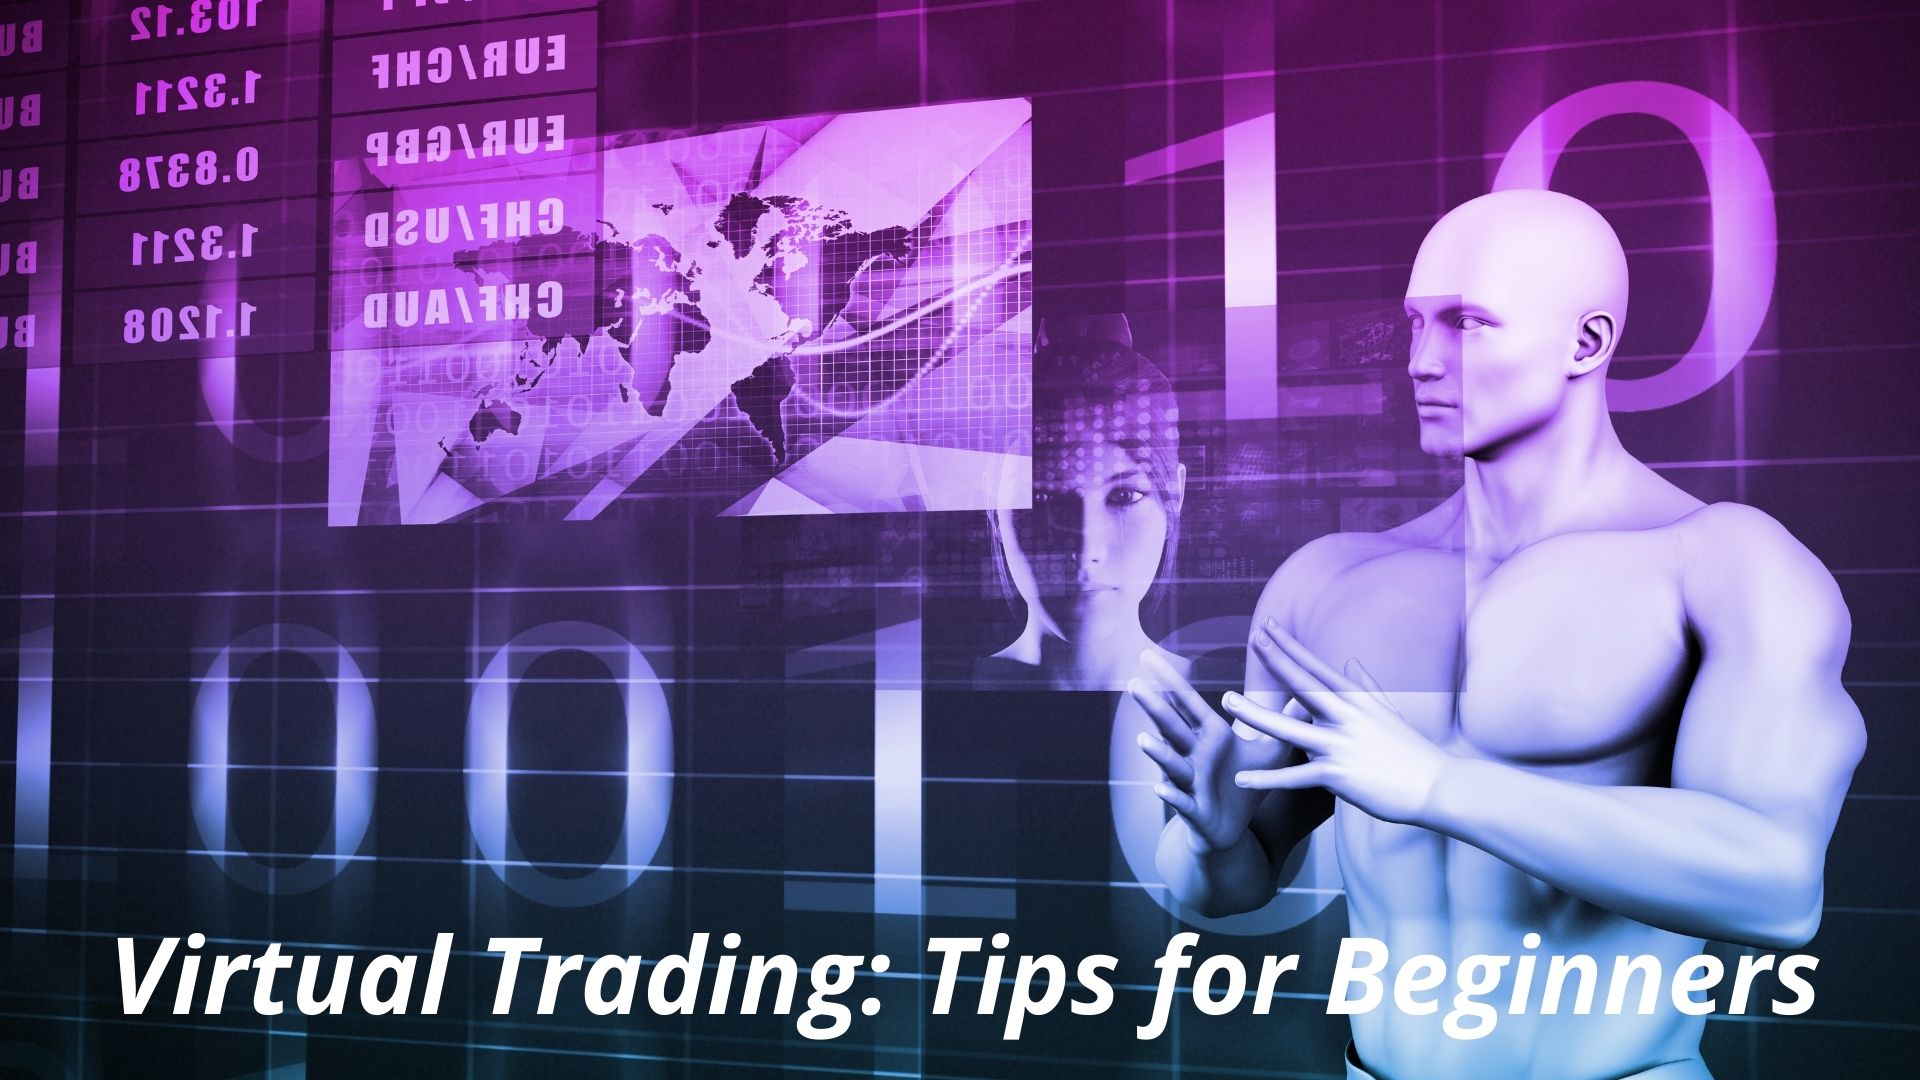 Virtual Trading: Tips for Beginners